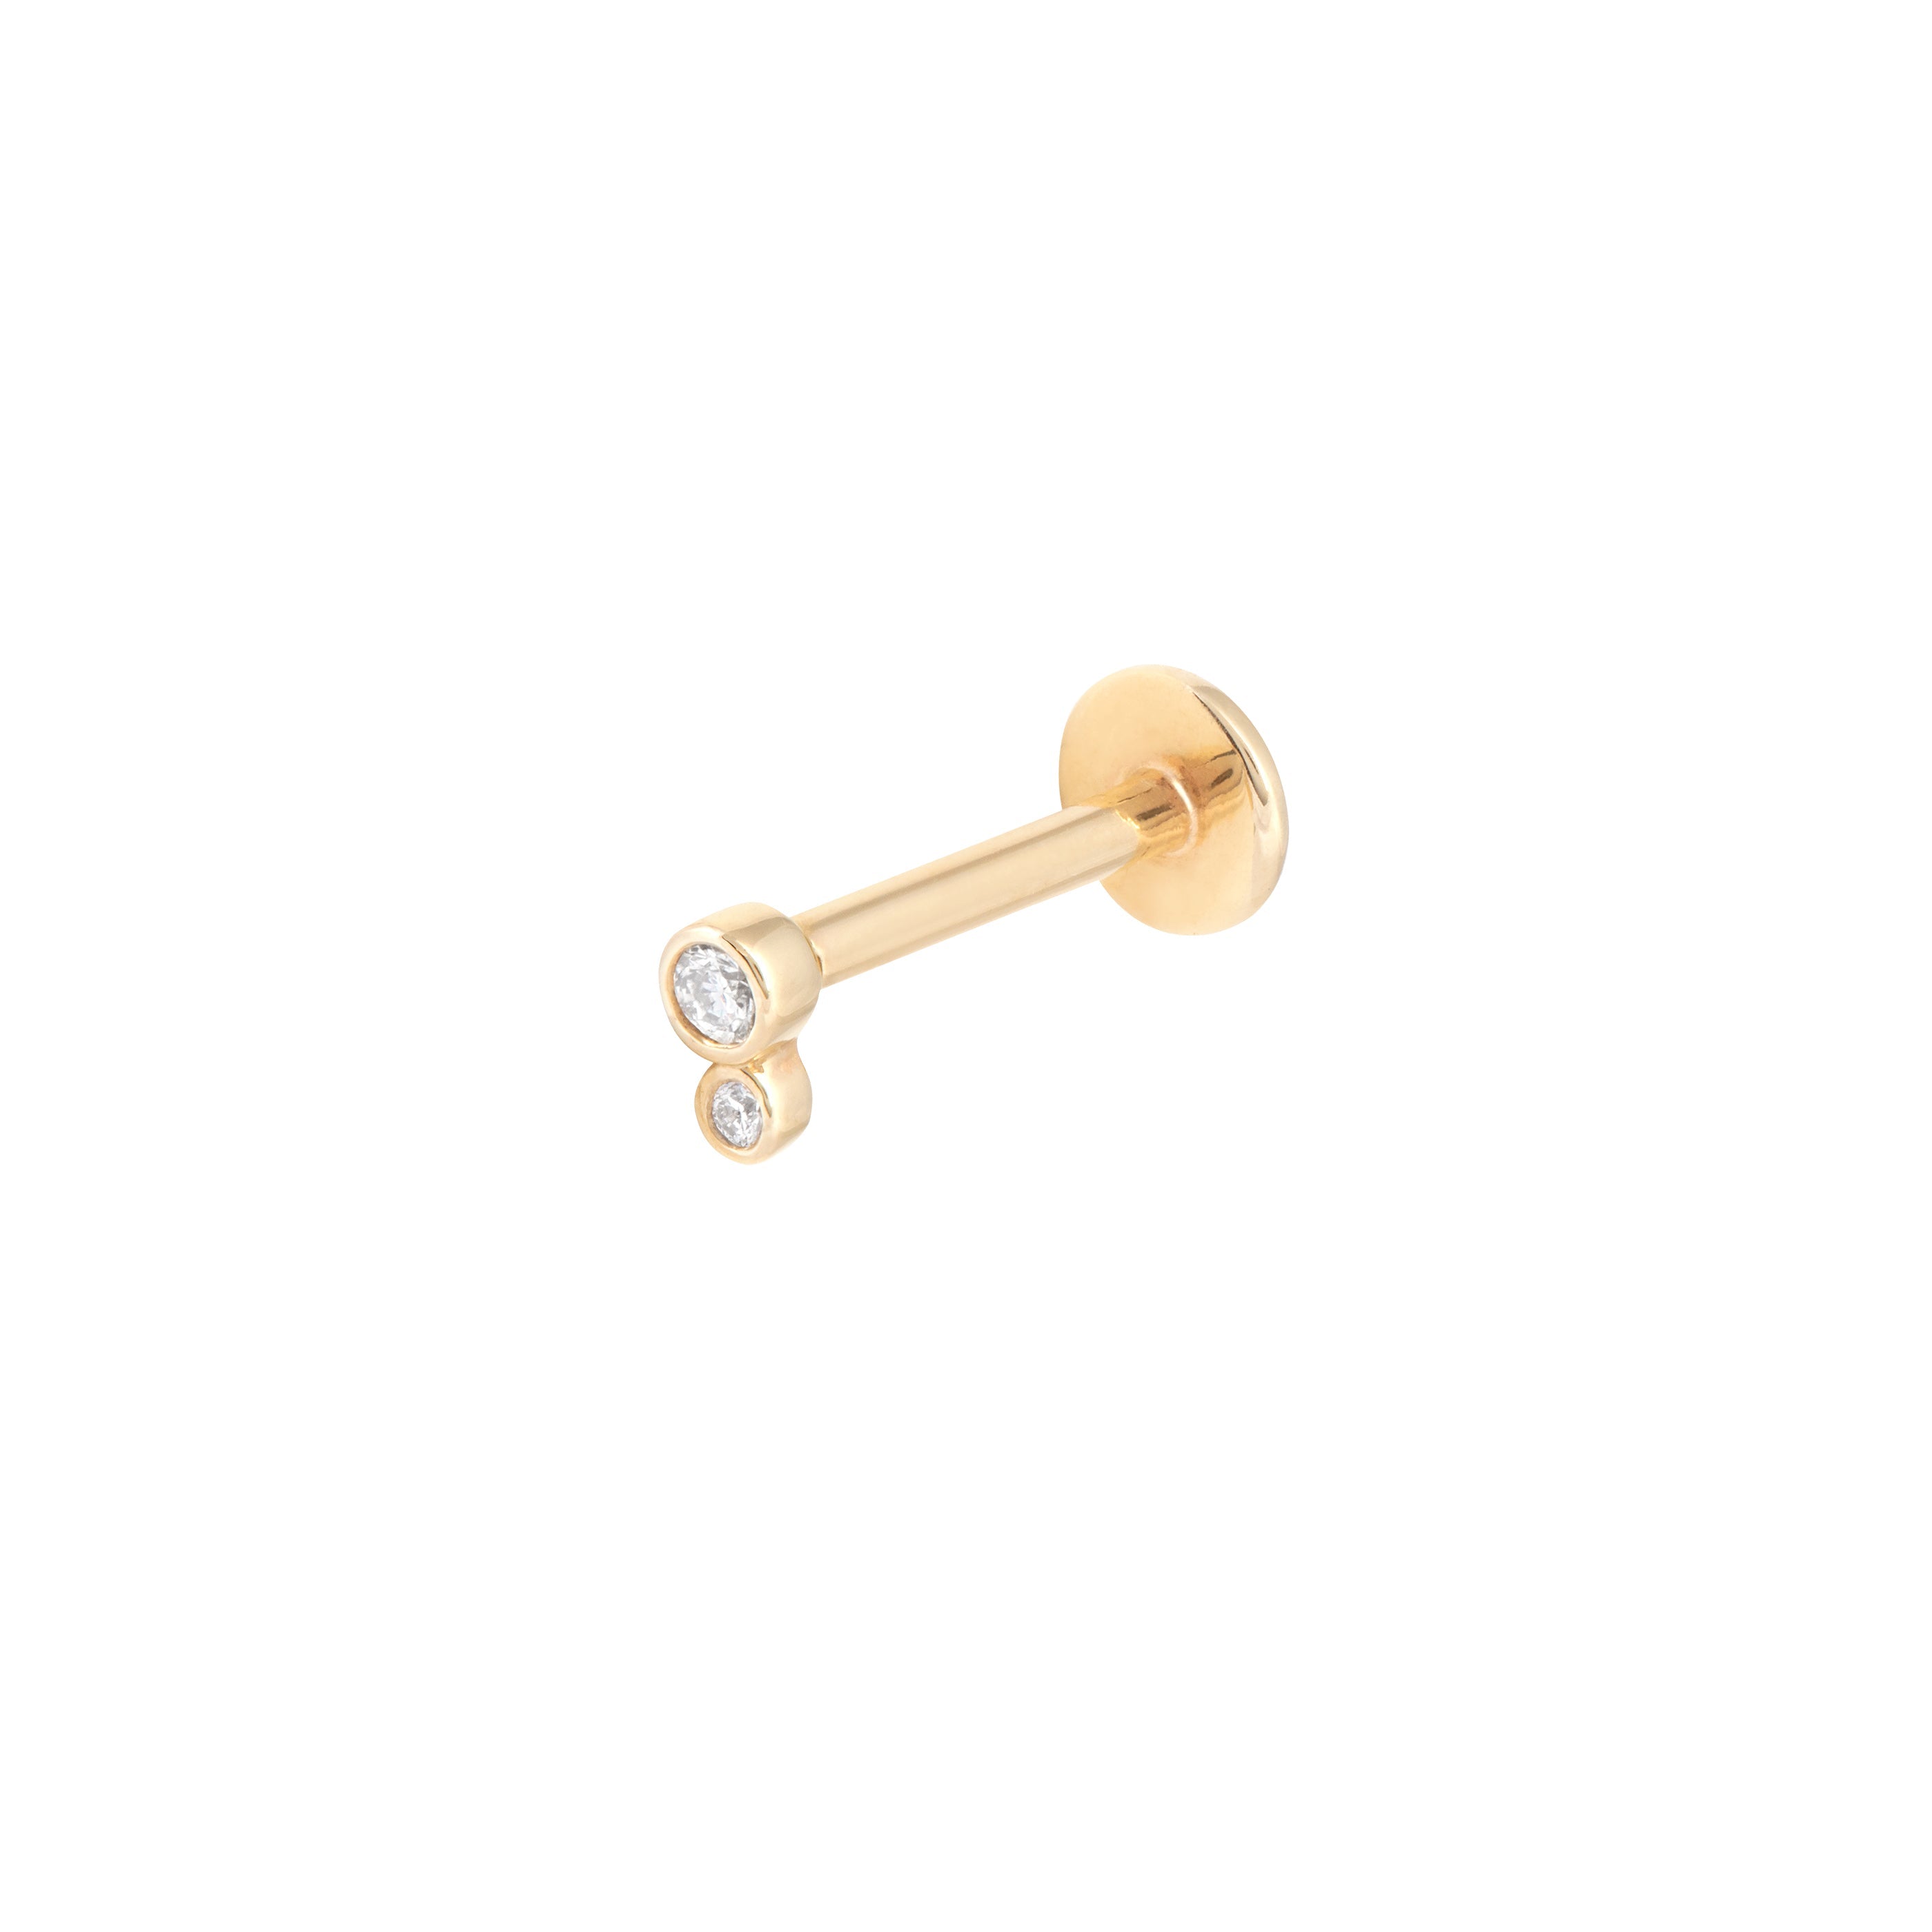 Solid Gold Double Topaz Piercing Stud